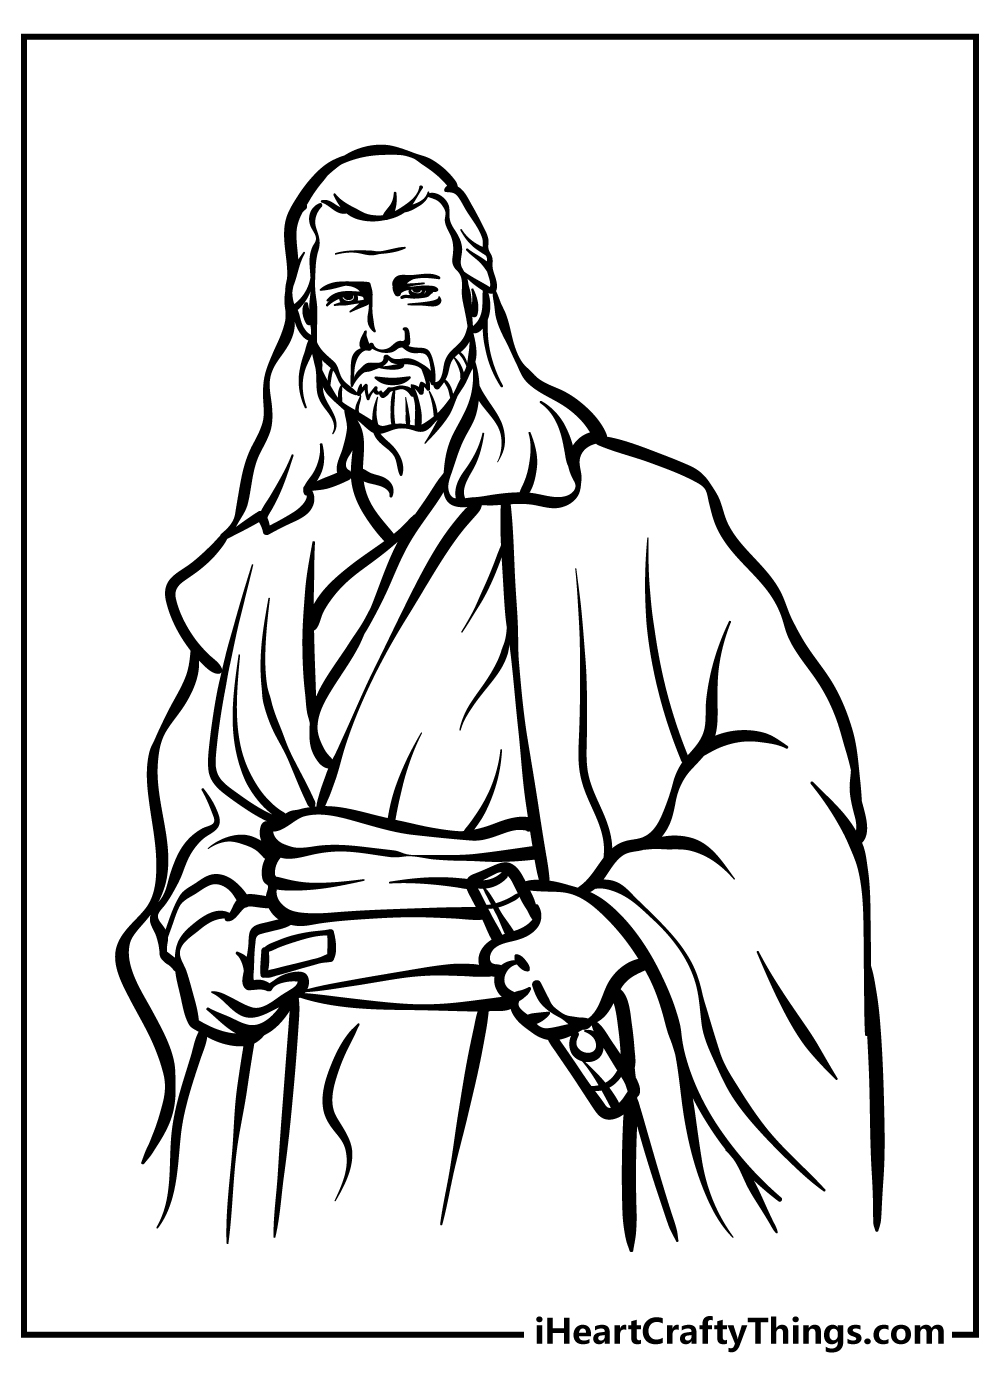 Star Wars Coloring Pages for adults free printable